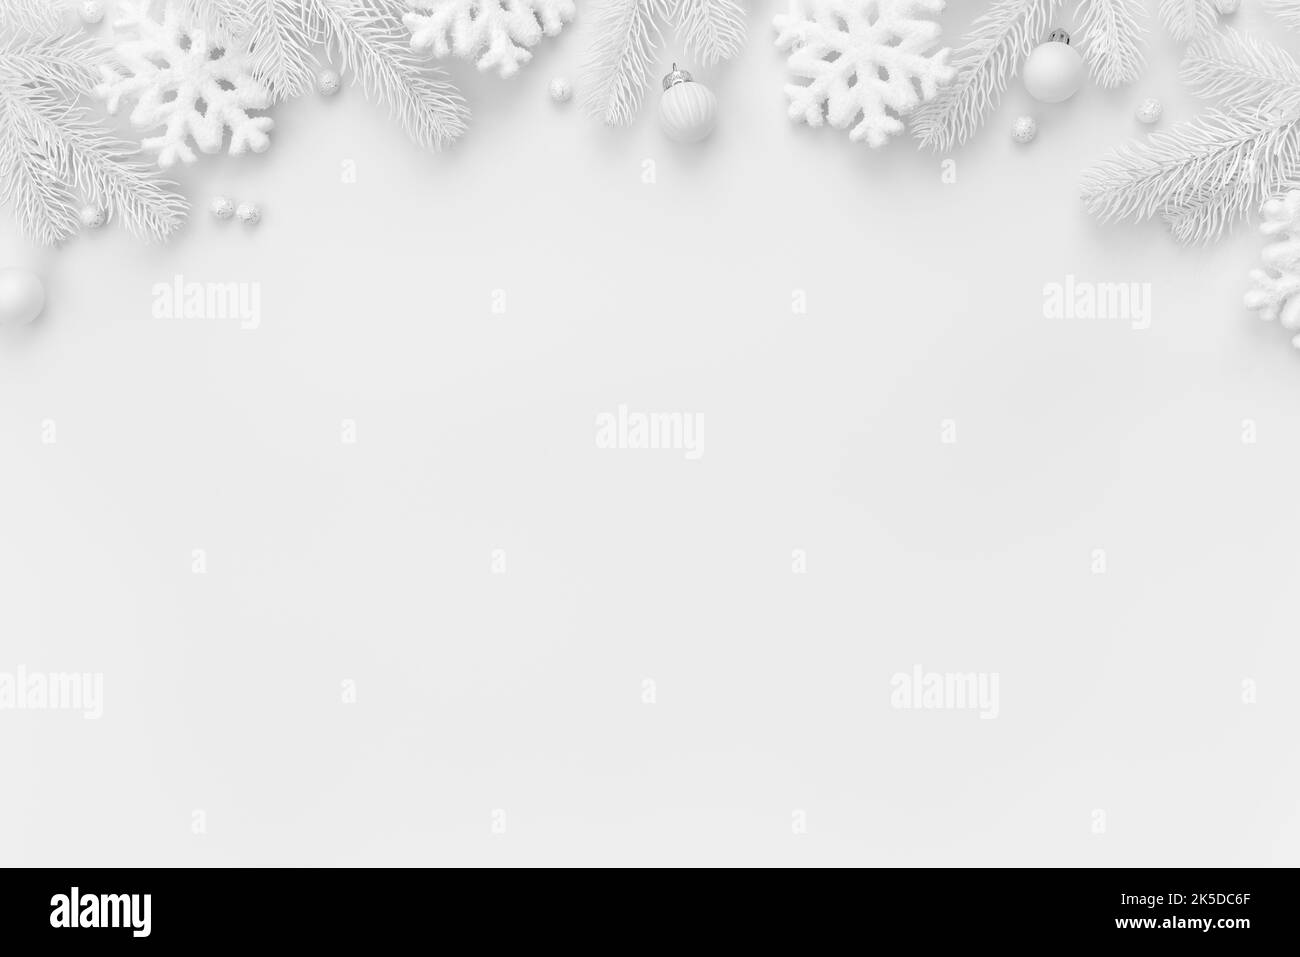 White Christmas background with border and copy space Stock Photo